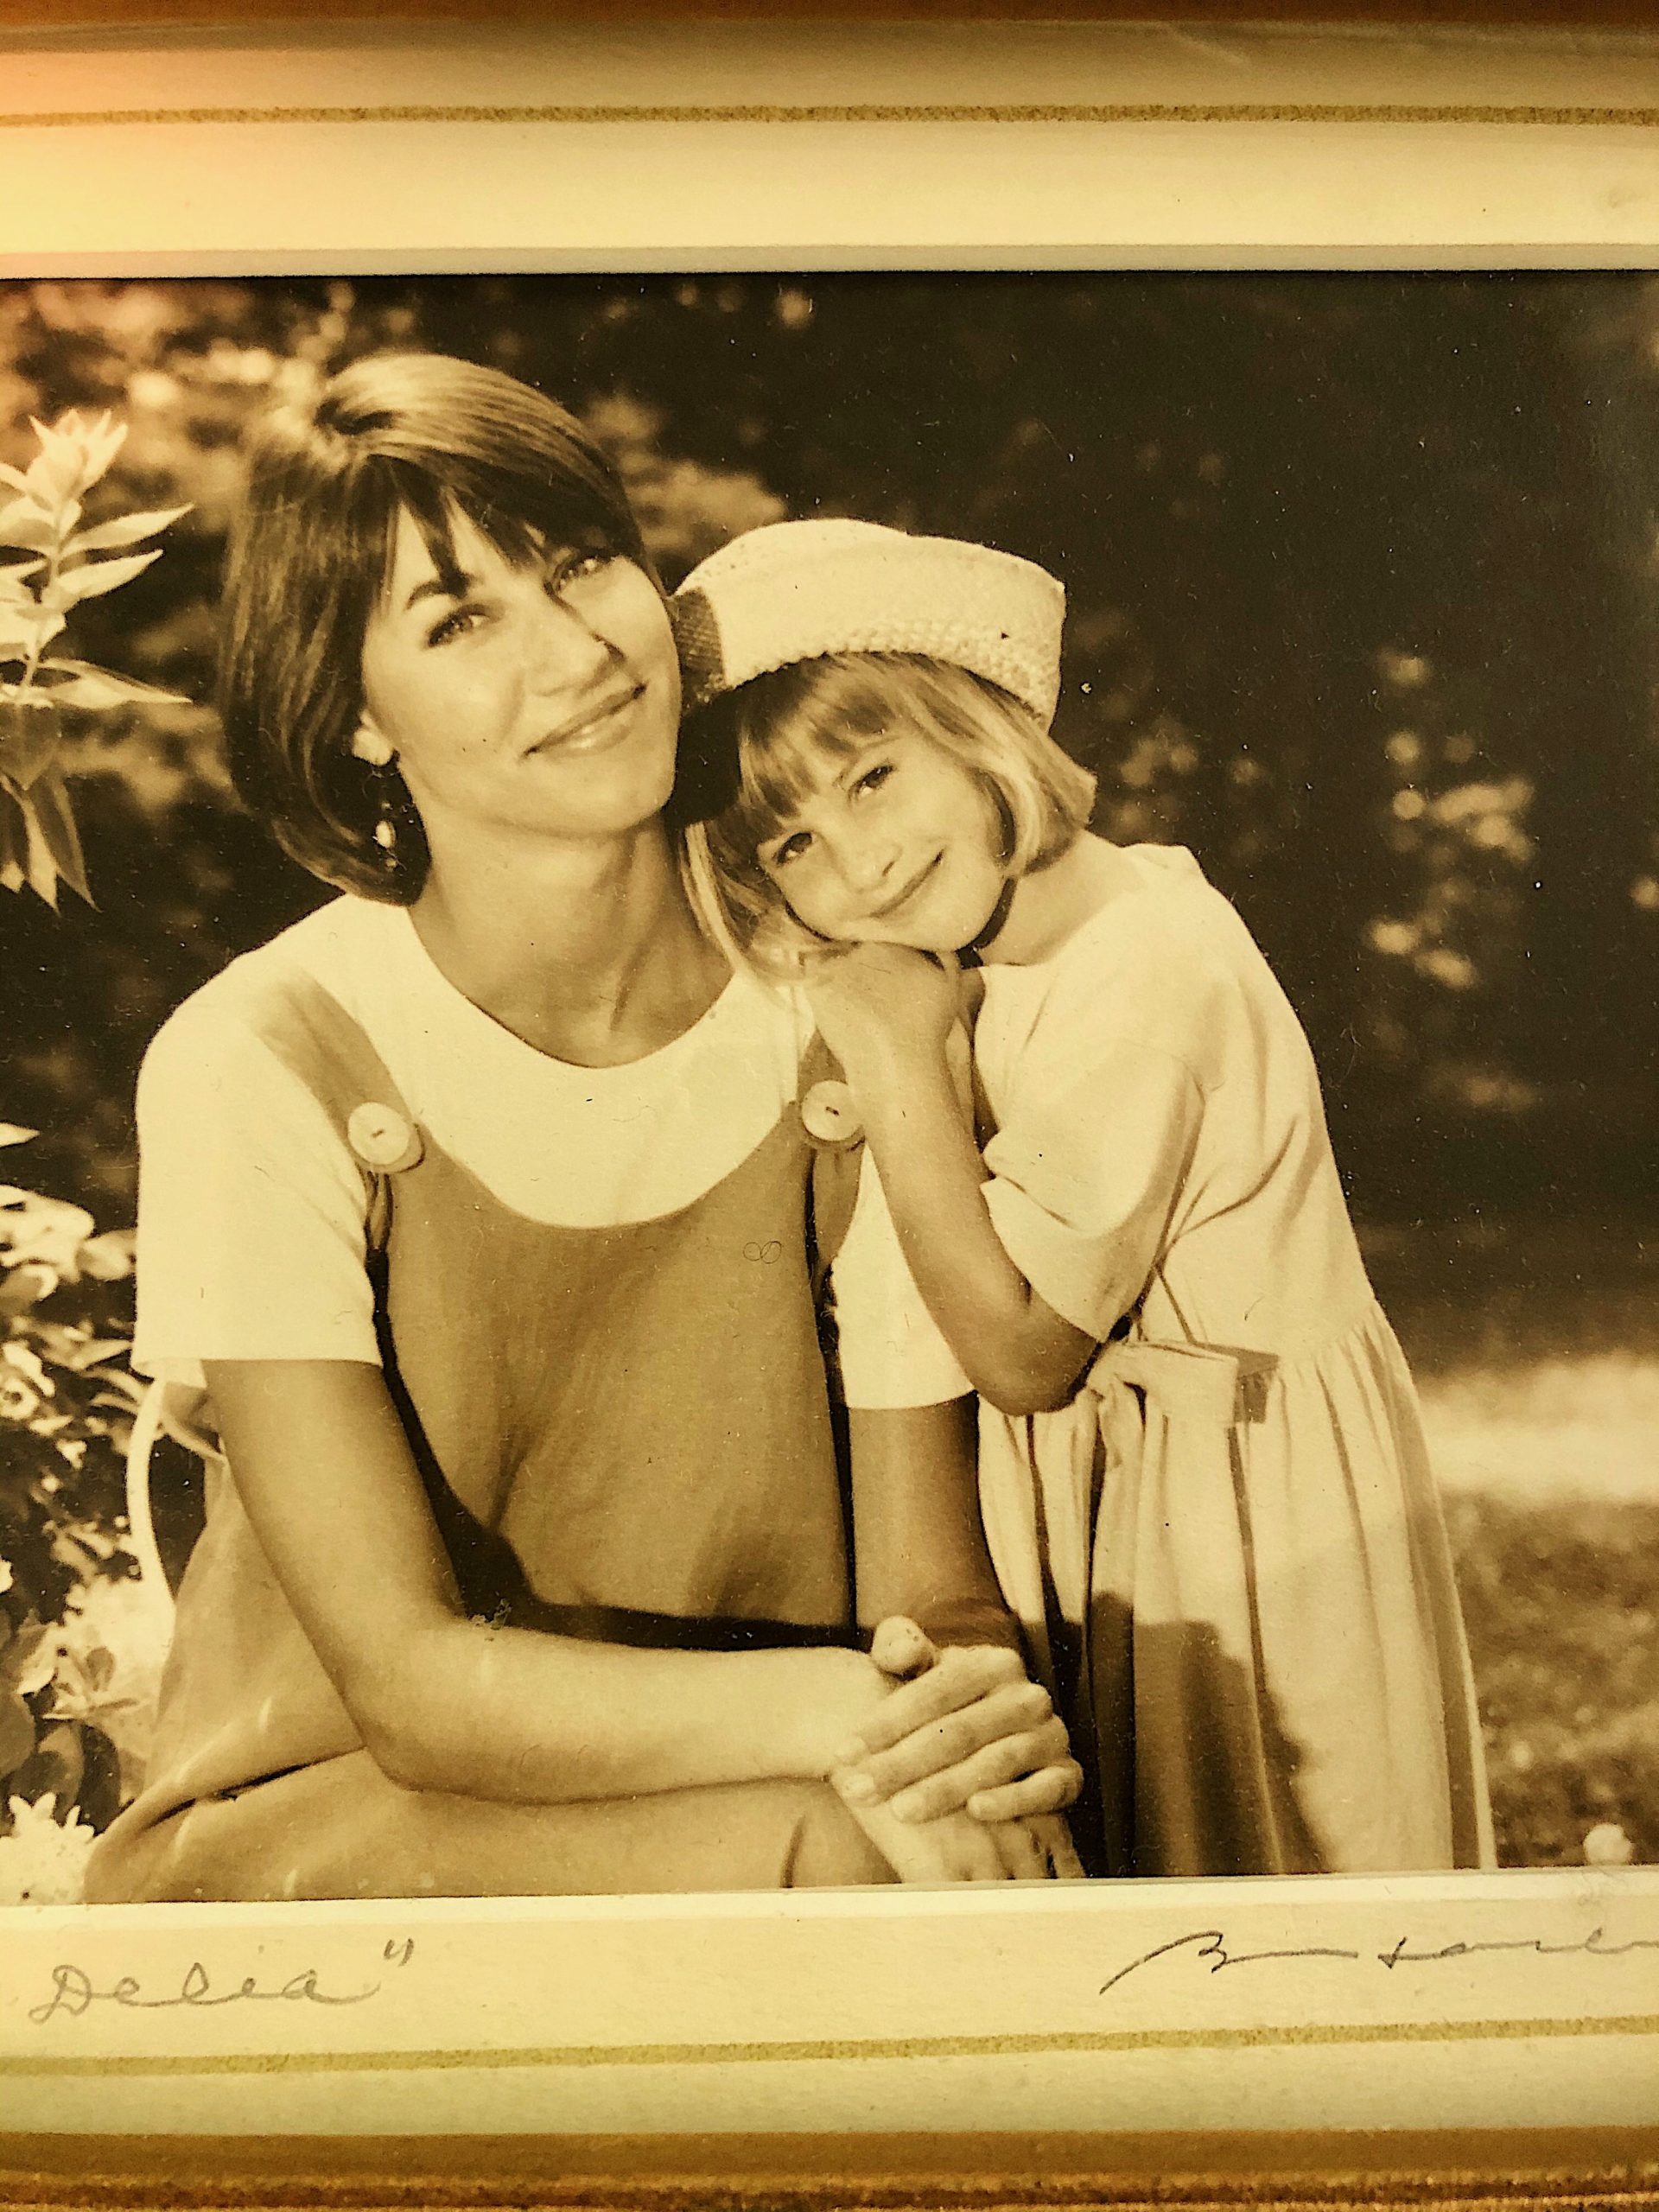 Mother & daughter: both with brown hair - one wears a dress over a short-sleeved shirt and the daughter wears a hat & a dress. The daughter has her mother's head on her shoulder